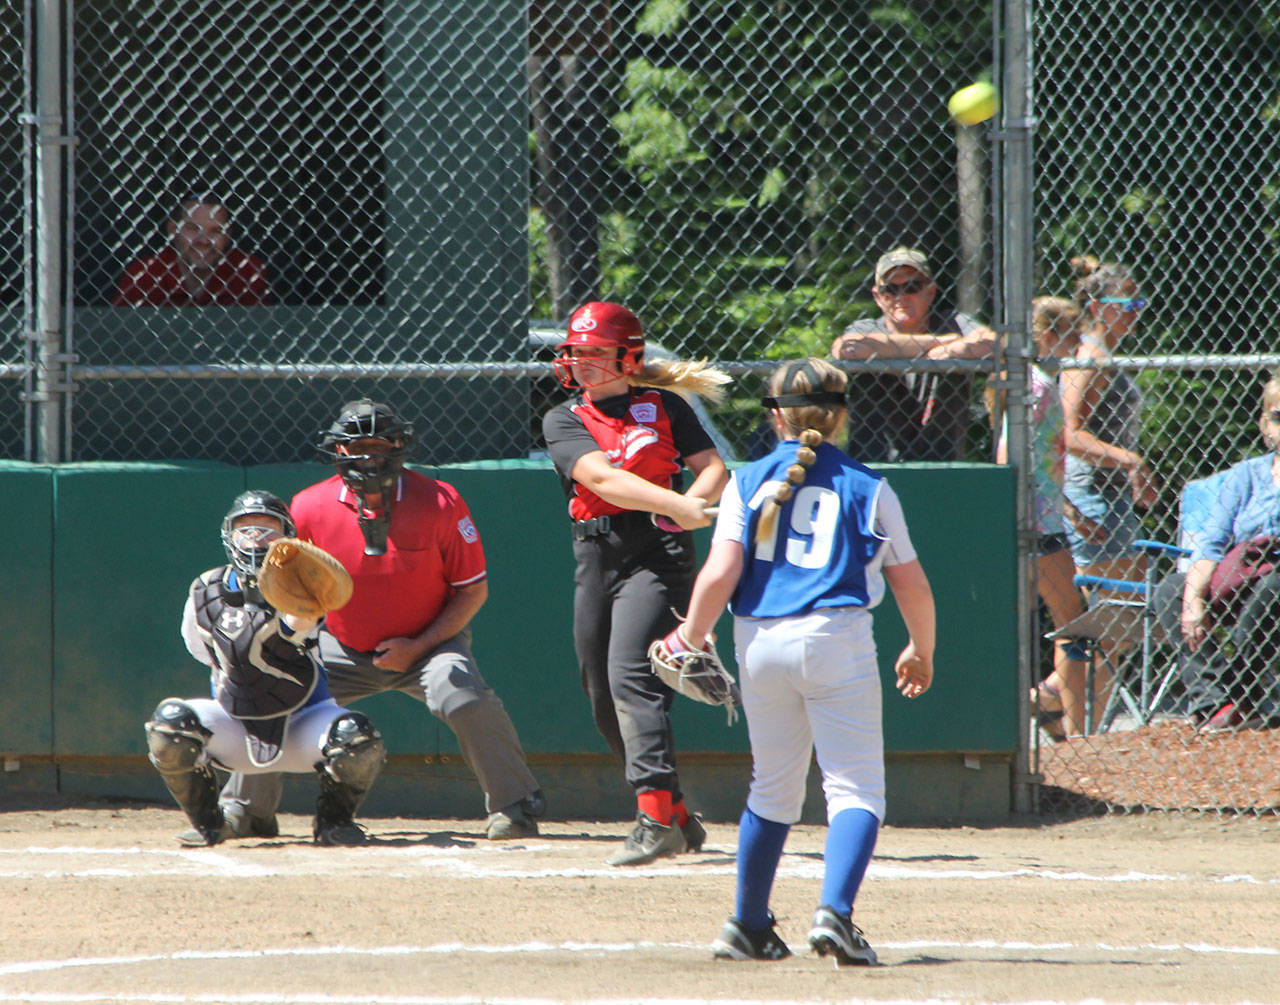 The ball flies off Madison McMillan’s bat, eventually going over the left fielder’s head for a triple. The next three photos below cover McMillan’s trip around the bases. (Photo by Jim Waller/Whidbey News-Times)